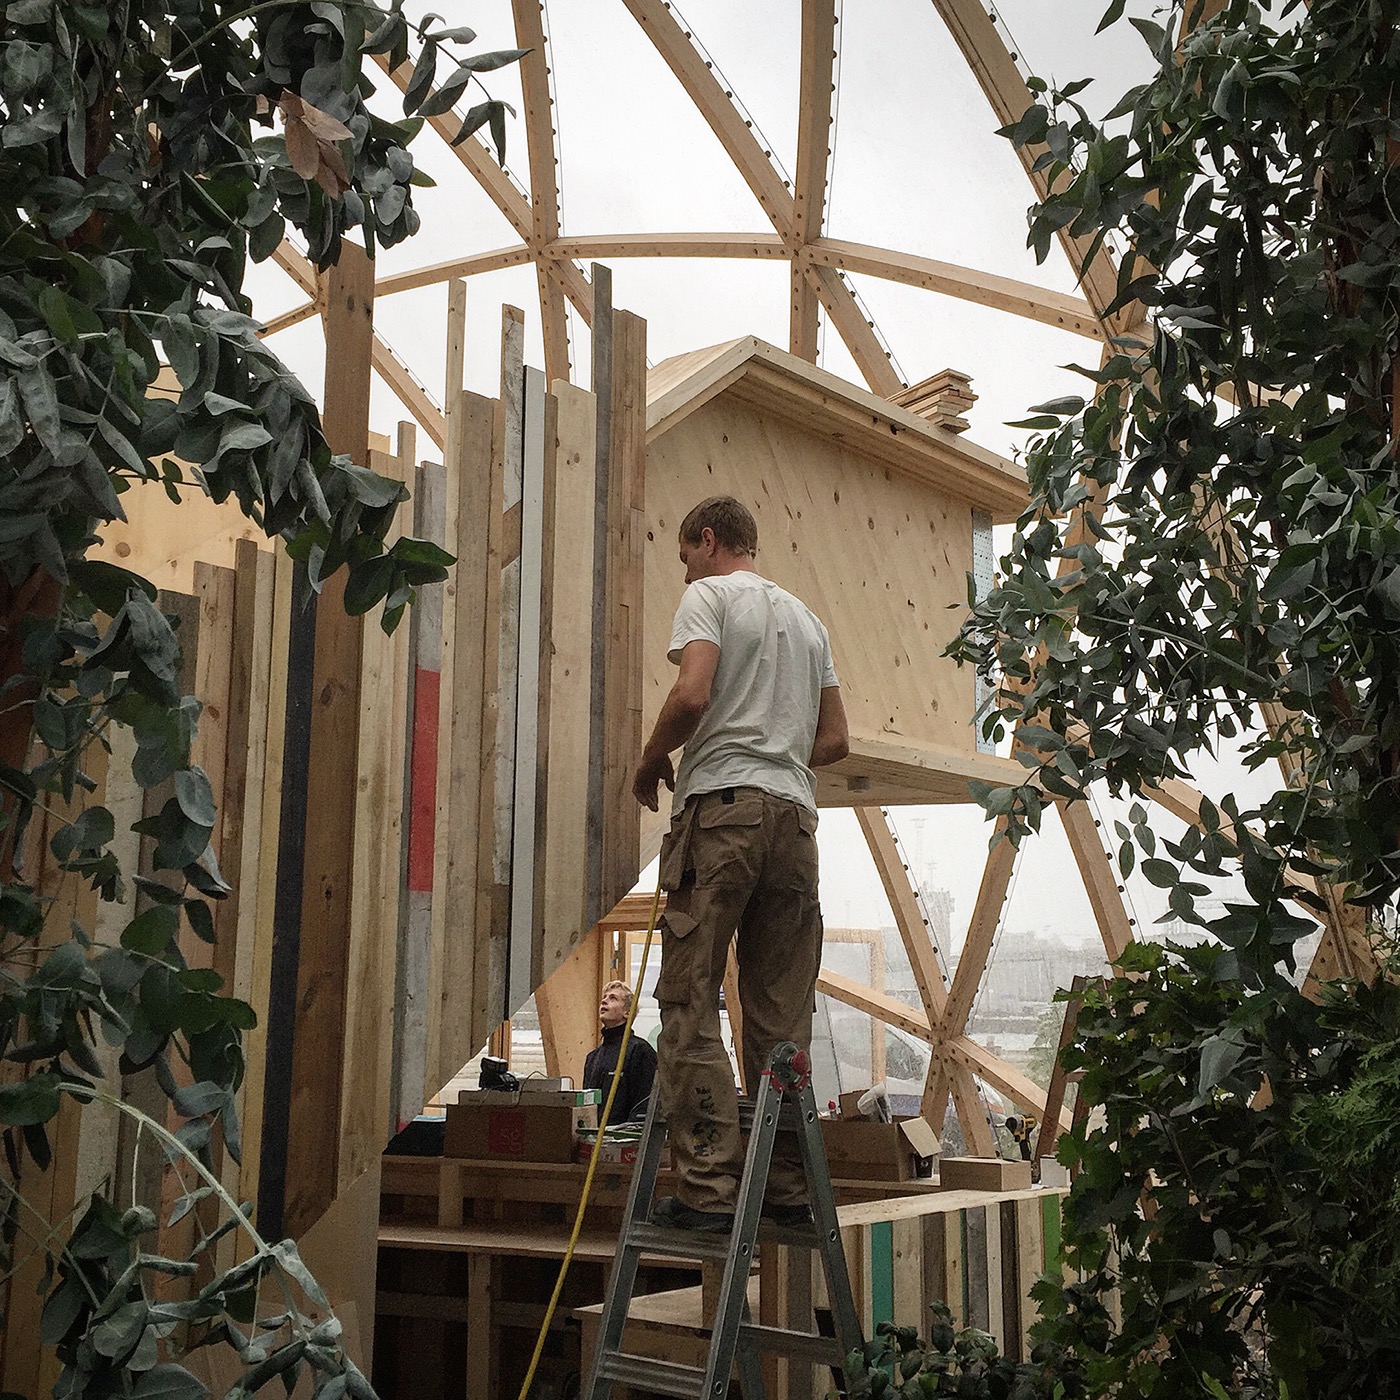 Geodesic dome greenhouse experiment cross laminated timber architecture